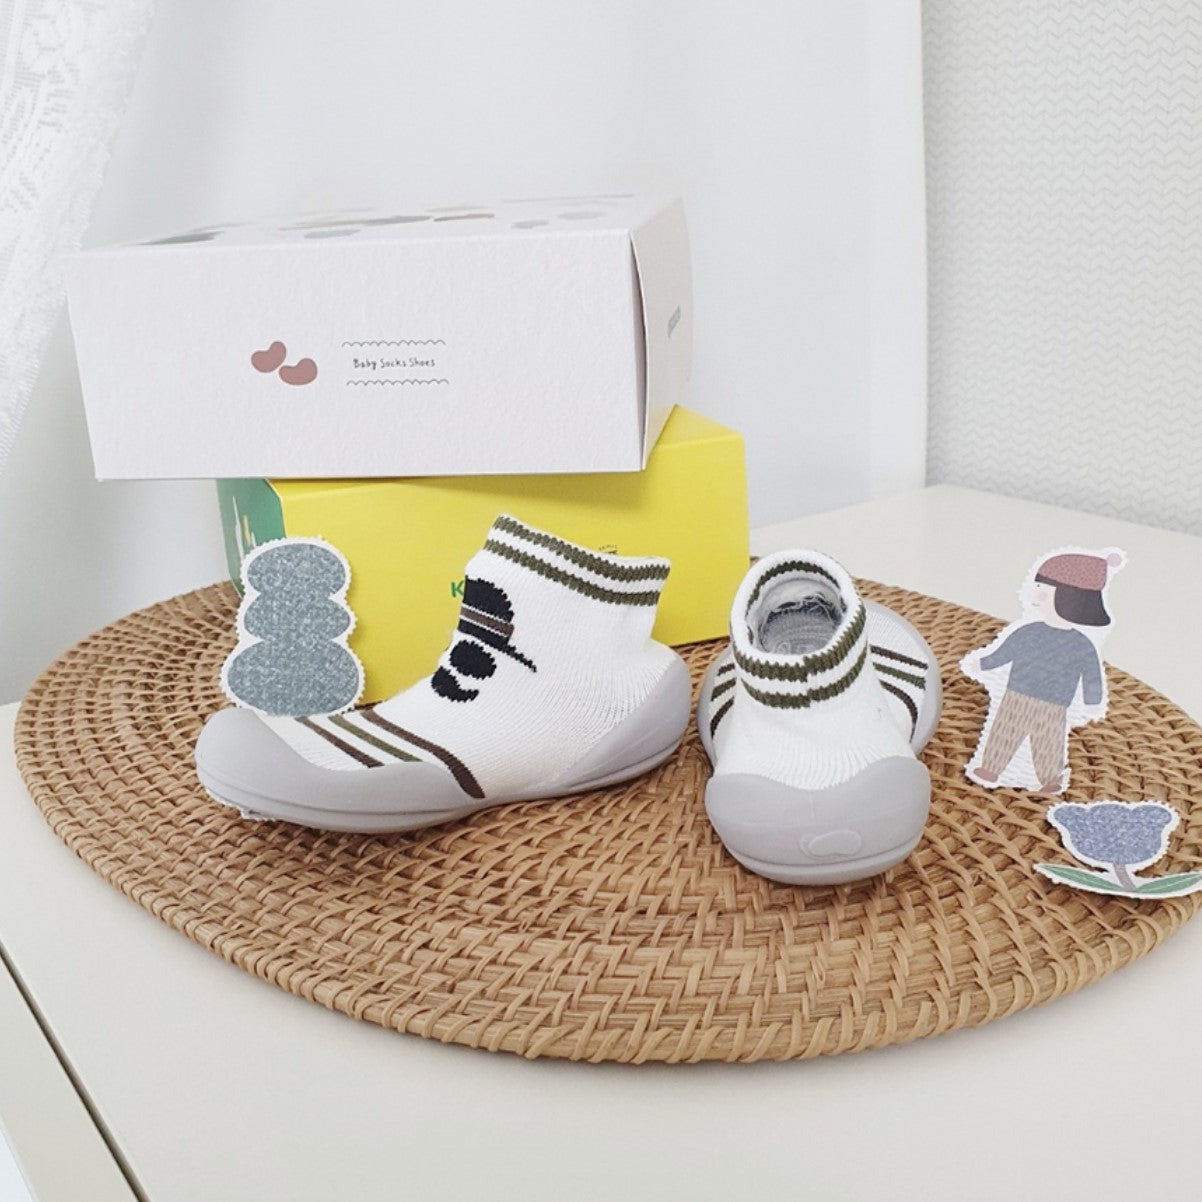 Rich Man Baby First Walking Shoes: Elastic baby shoes with honeycomb outsole for slip resistance. Gentle flex for delicate baby foot cartilage, lightweight design for growth and learning to walk.